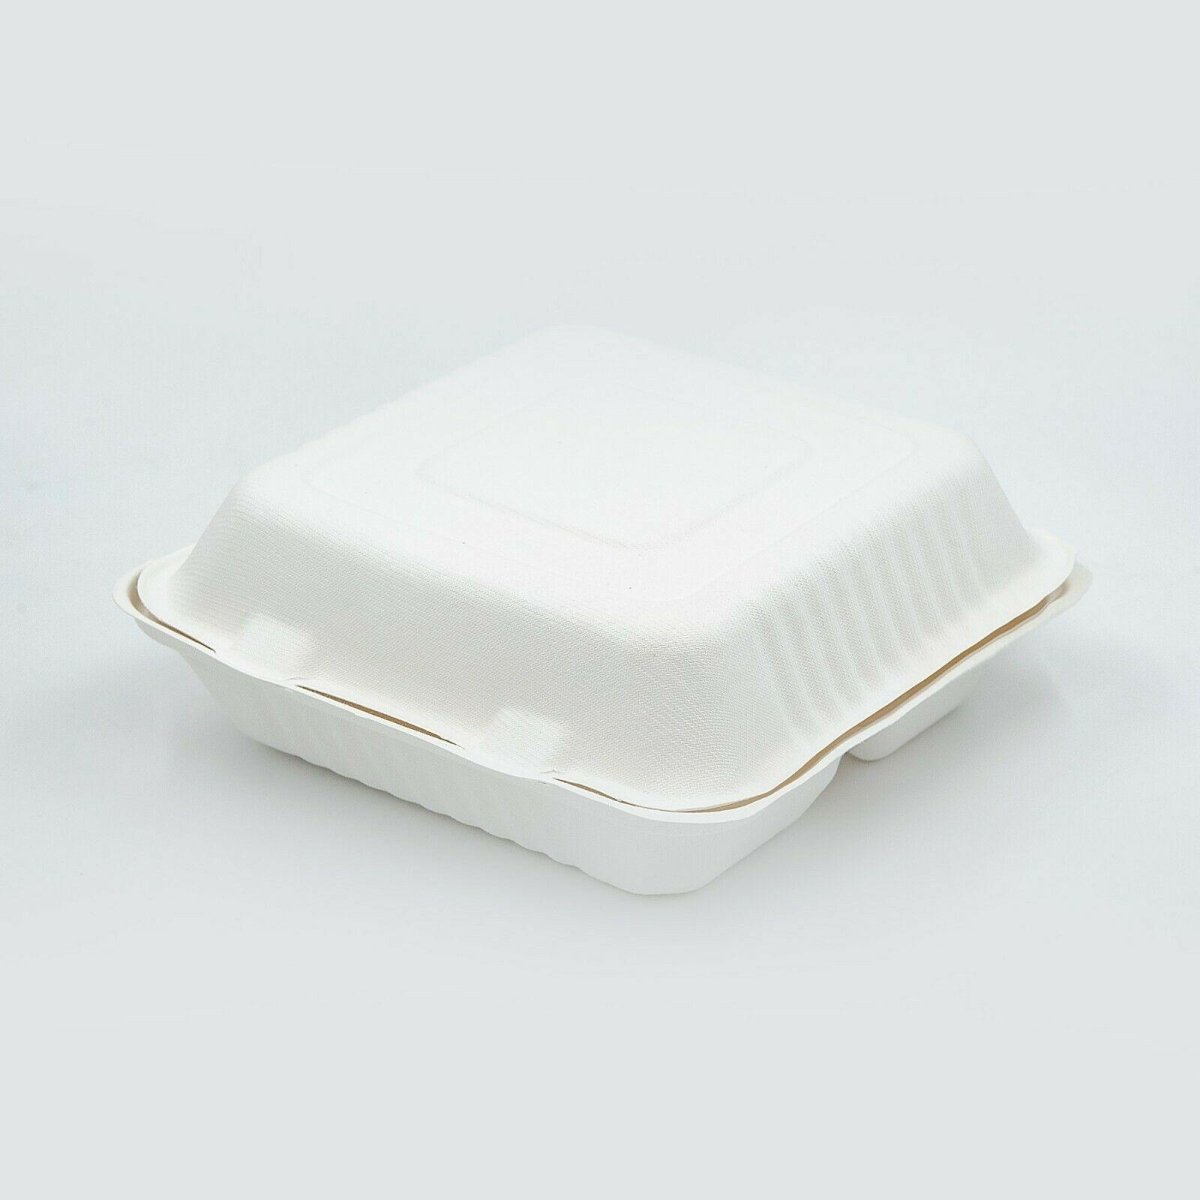 9 x 9 x 3" Sugarcane Clamshell Compostable Takeaway Food Containers - eBPak